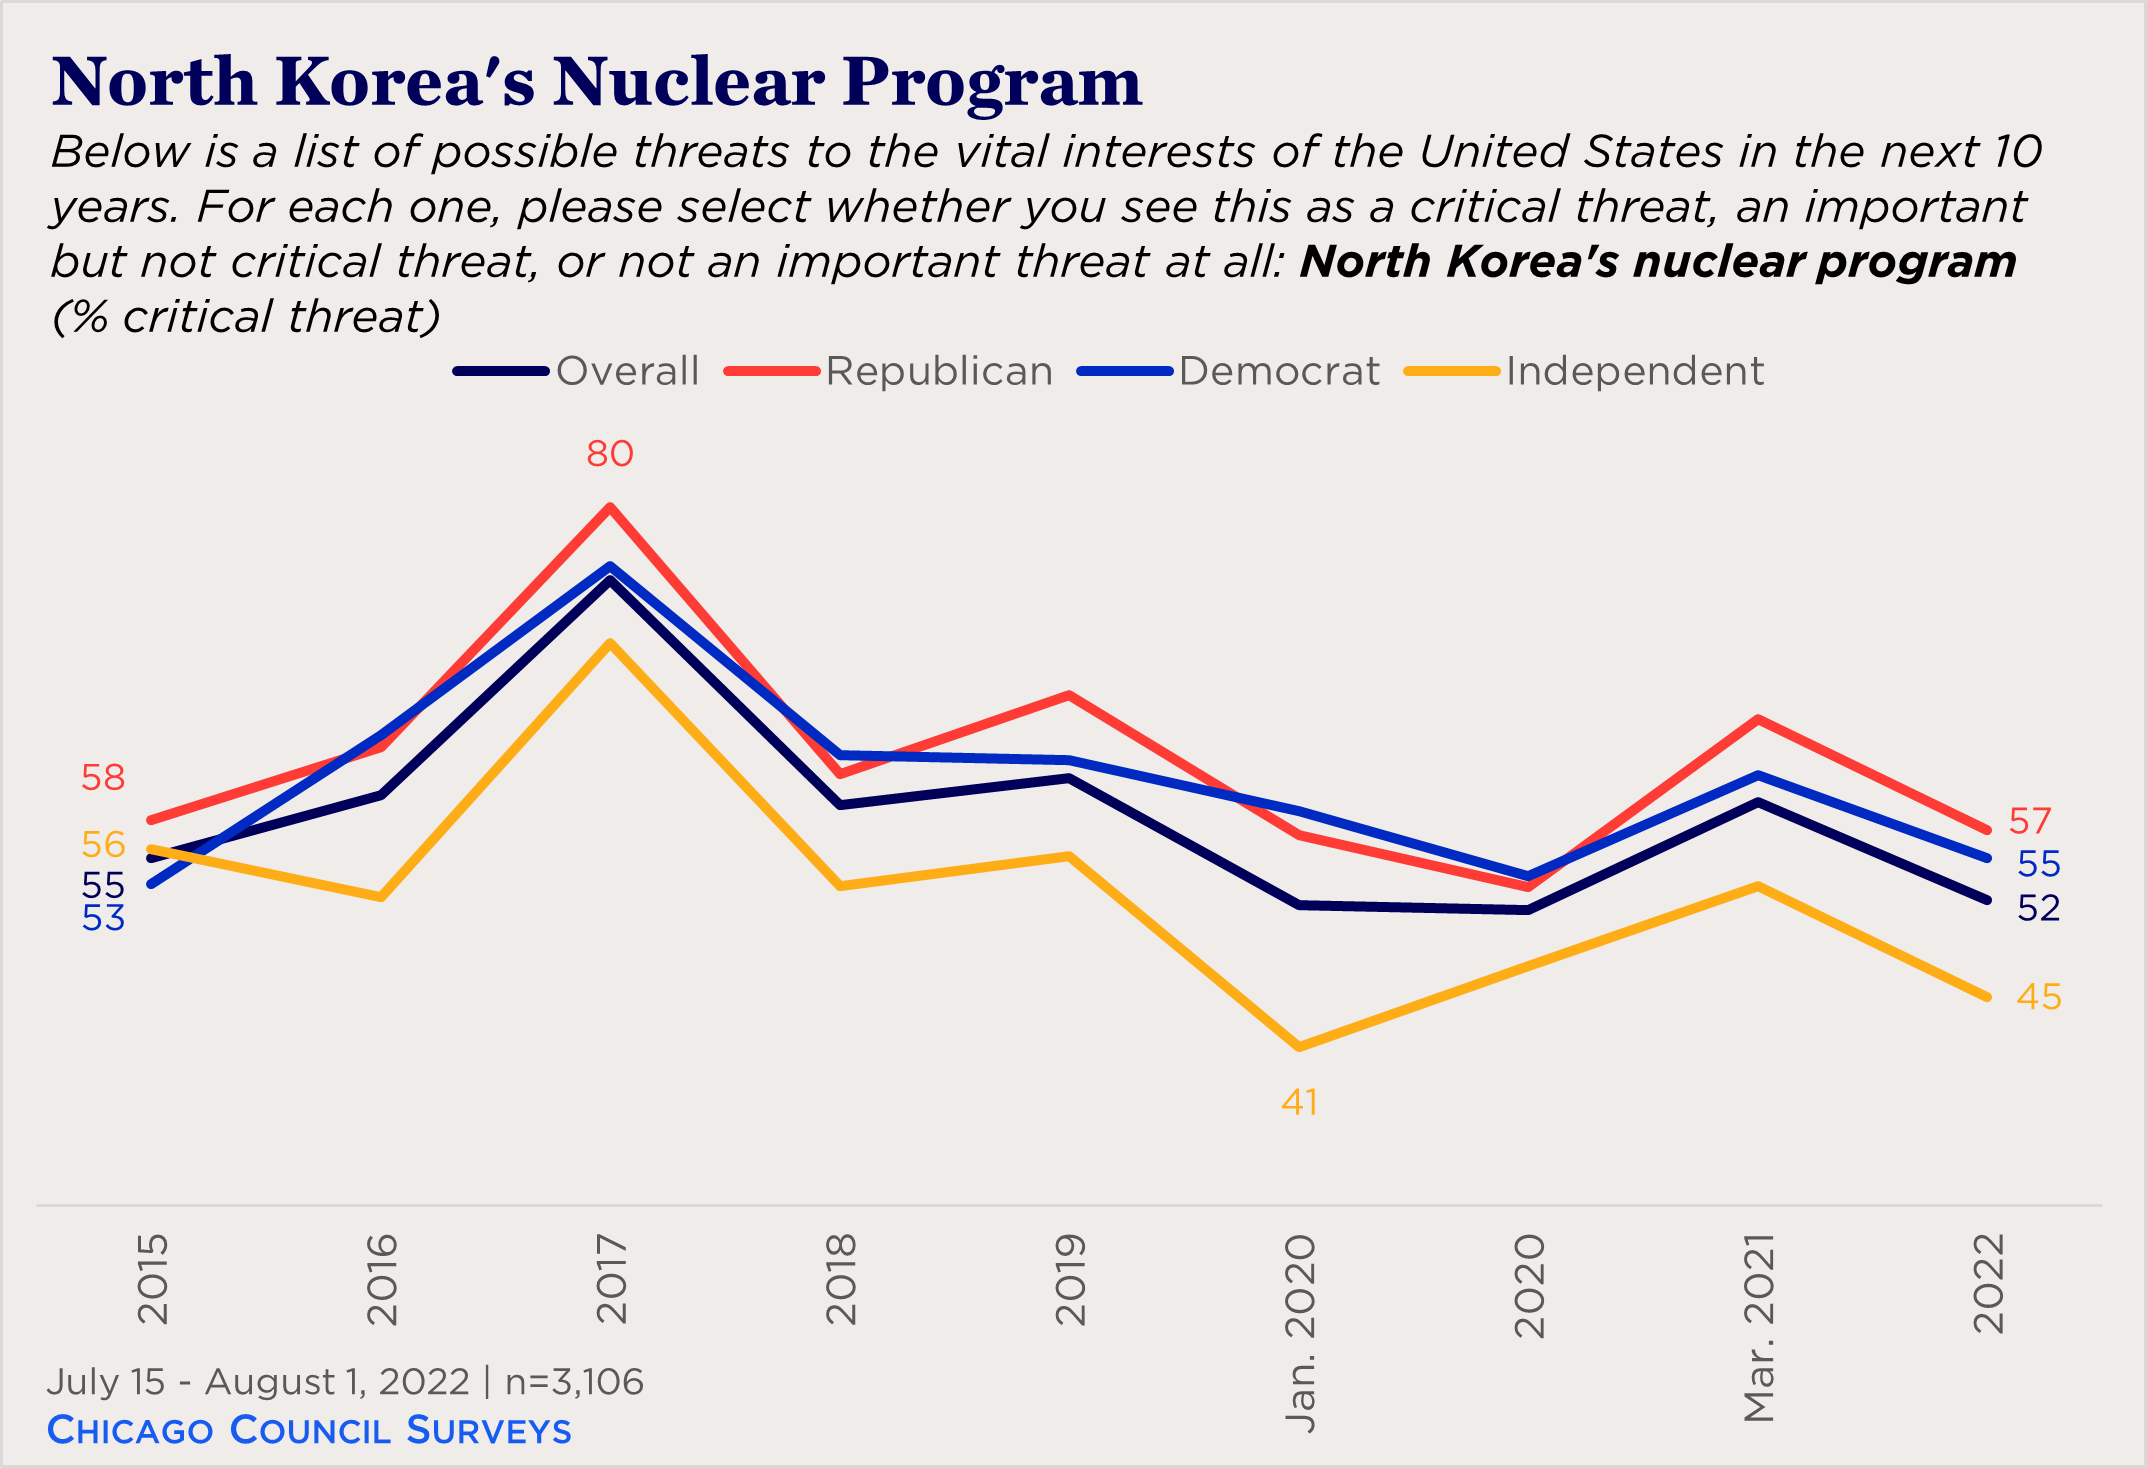 "line chart showing partisan views of North Korea's nuclear program"